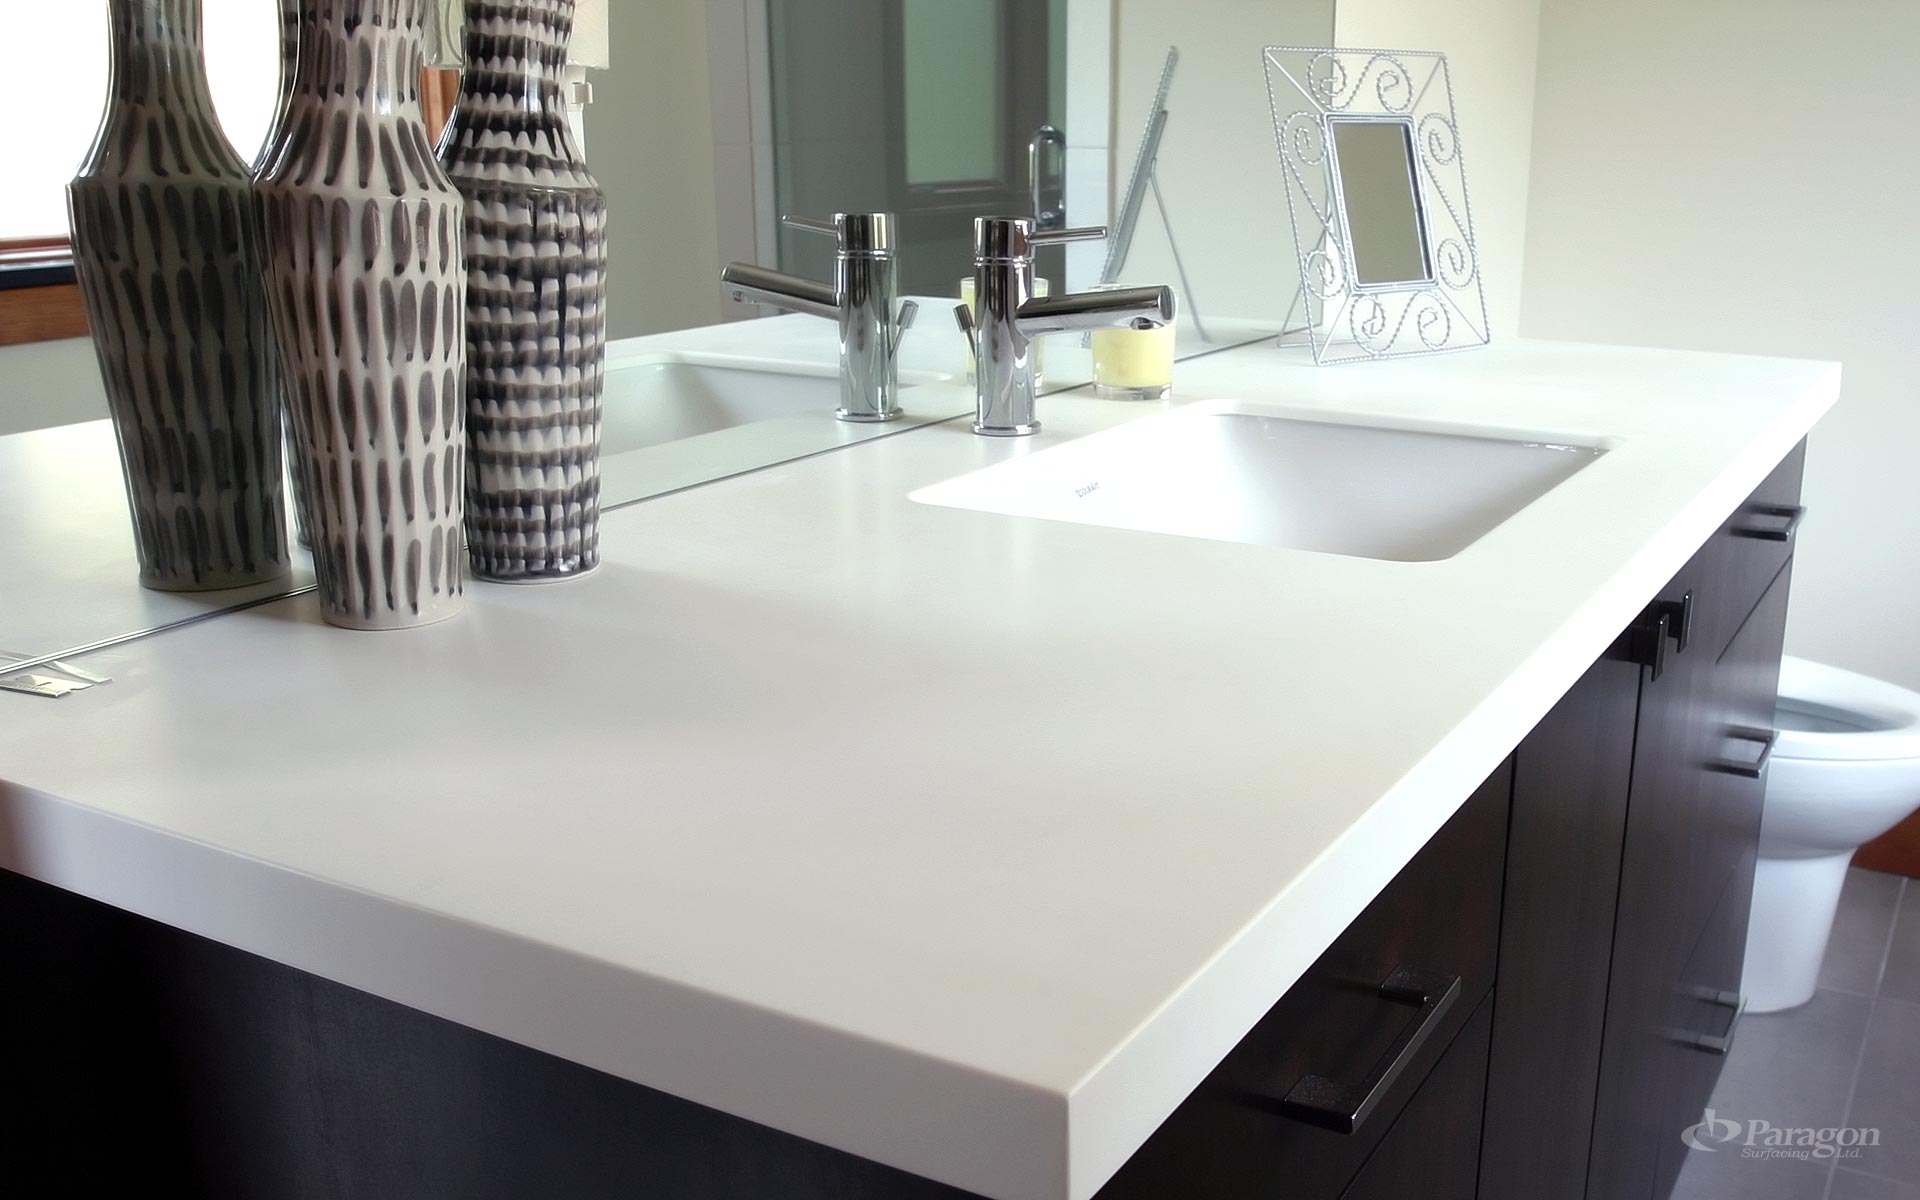 Solid Surface Countertops Cost, How To Install Corian Countertops